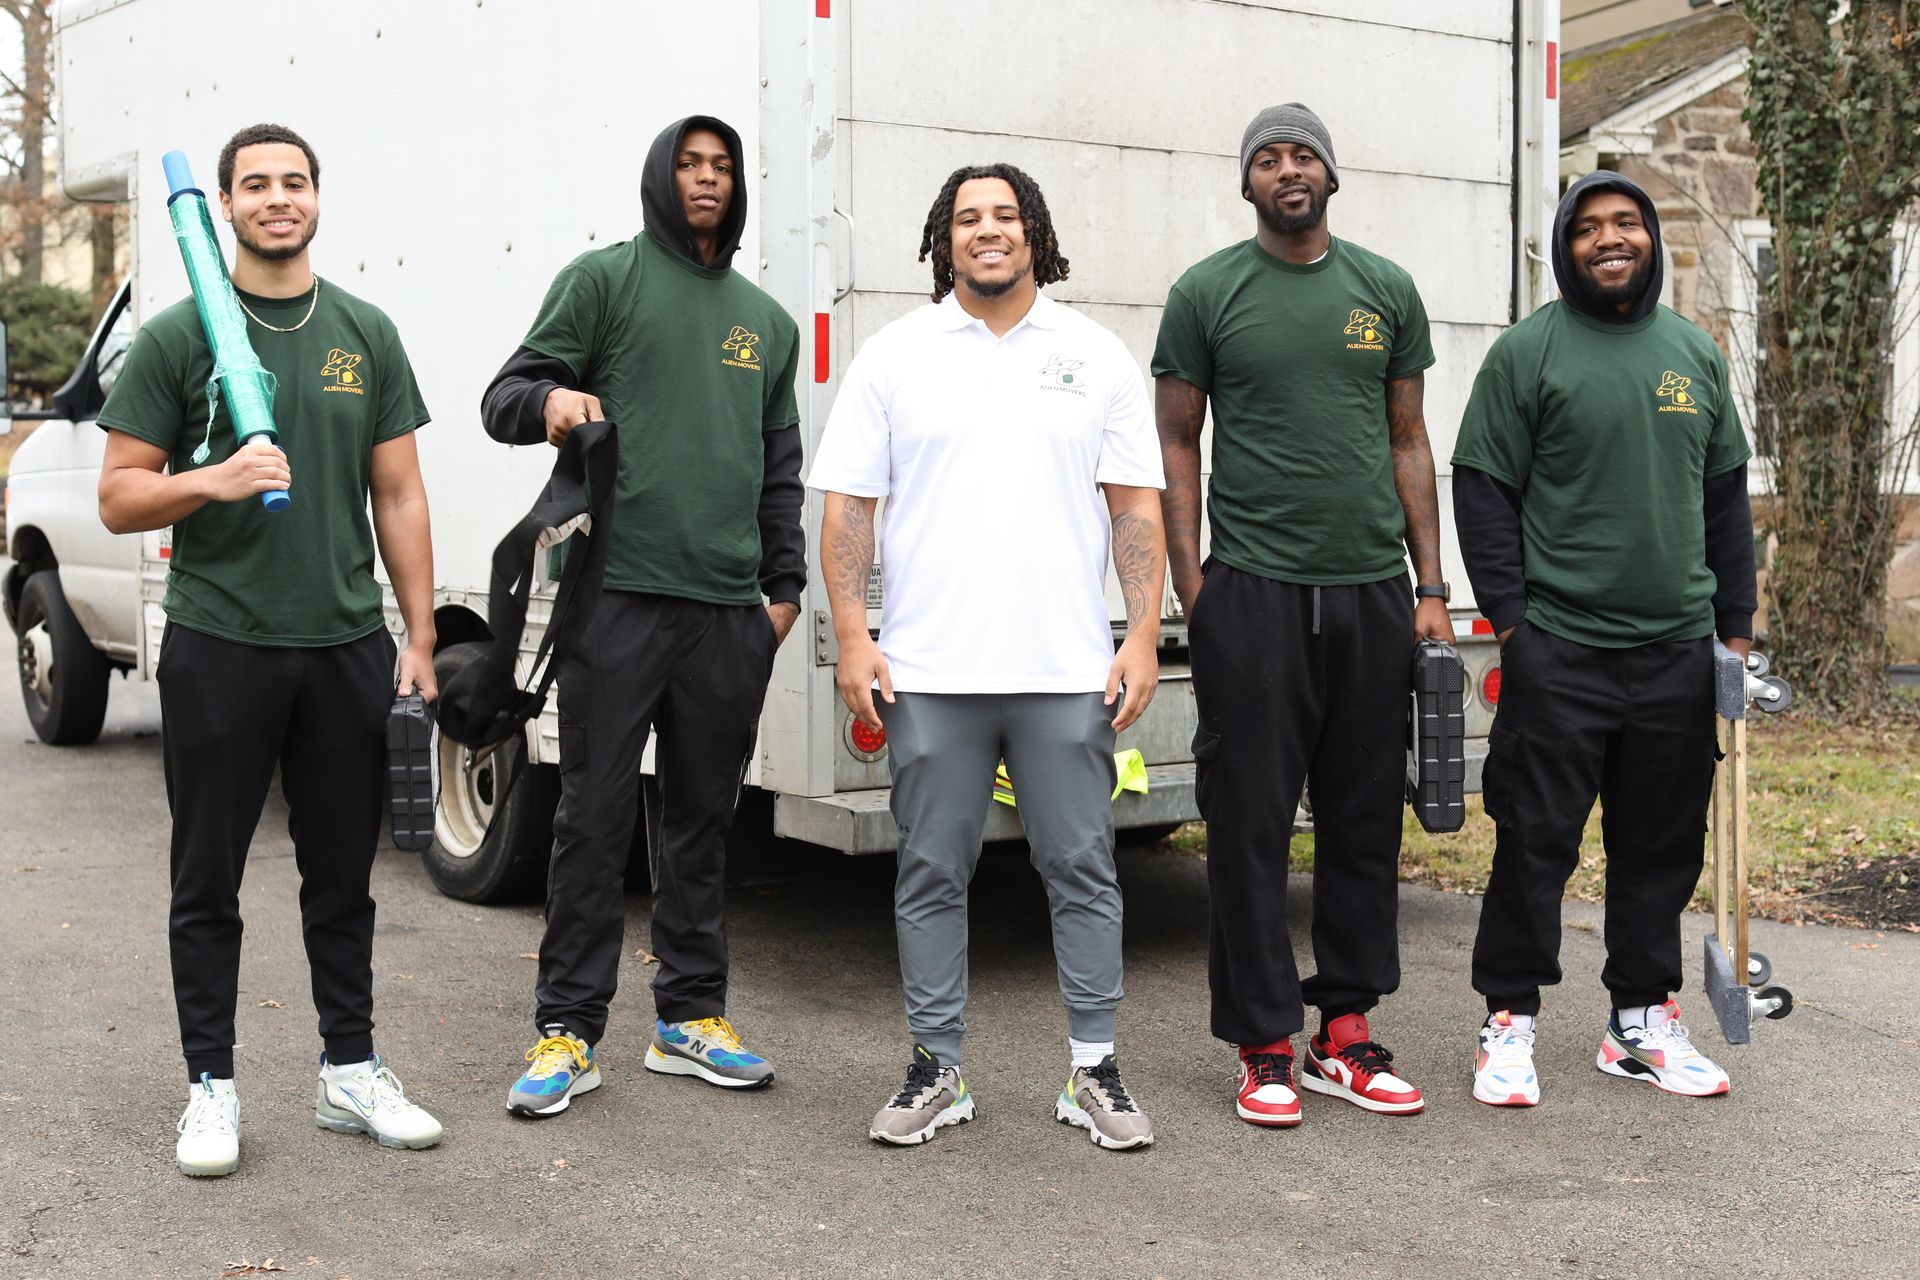 A team of five professional movers from Alien Mover, dressed in branded green uniforms, standing confidently in front of their moving truck, ready to provide top-notch Philadelphia Moving Services.